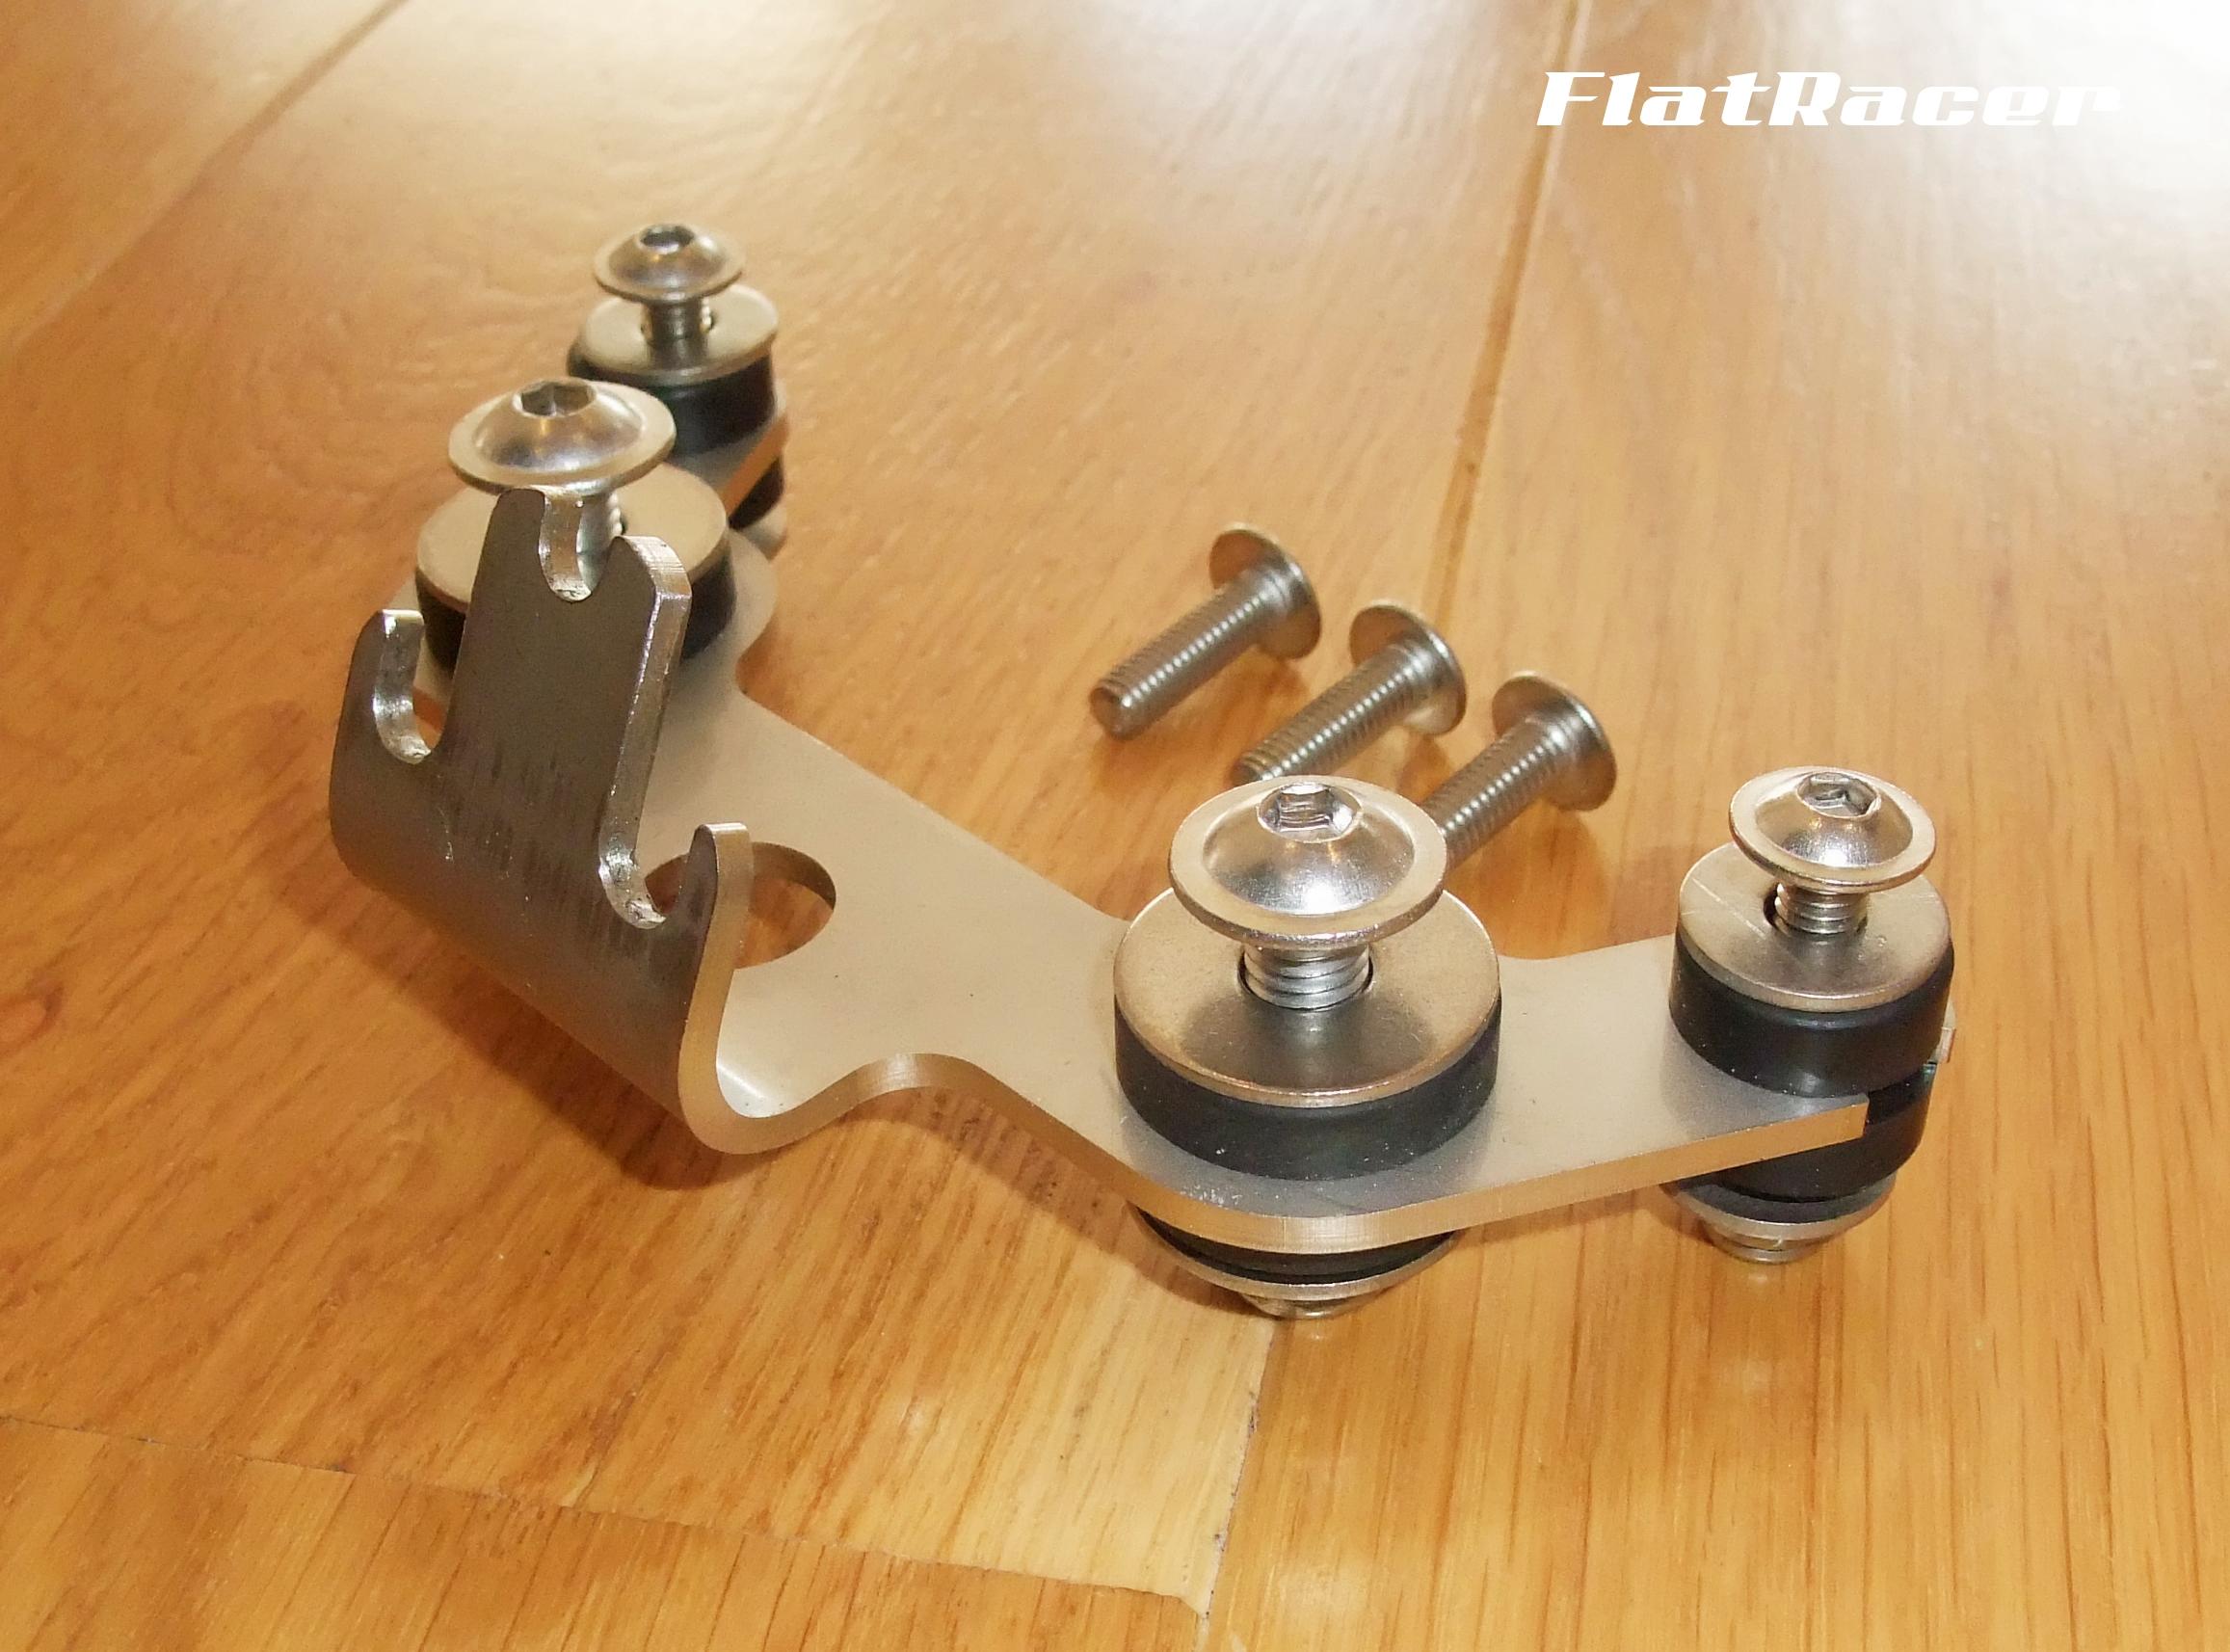 FlatRacer BMW Airhead Boxer stainless steel ultra-low instrument cluster bracket - with fittings